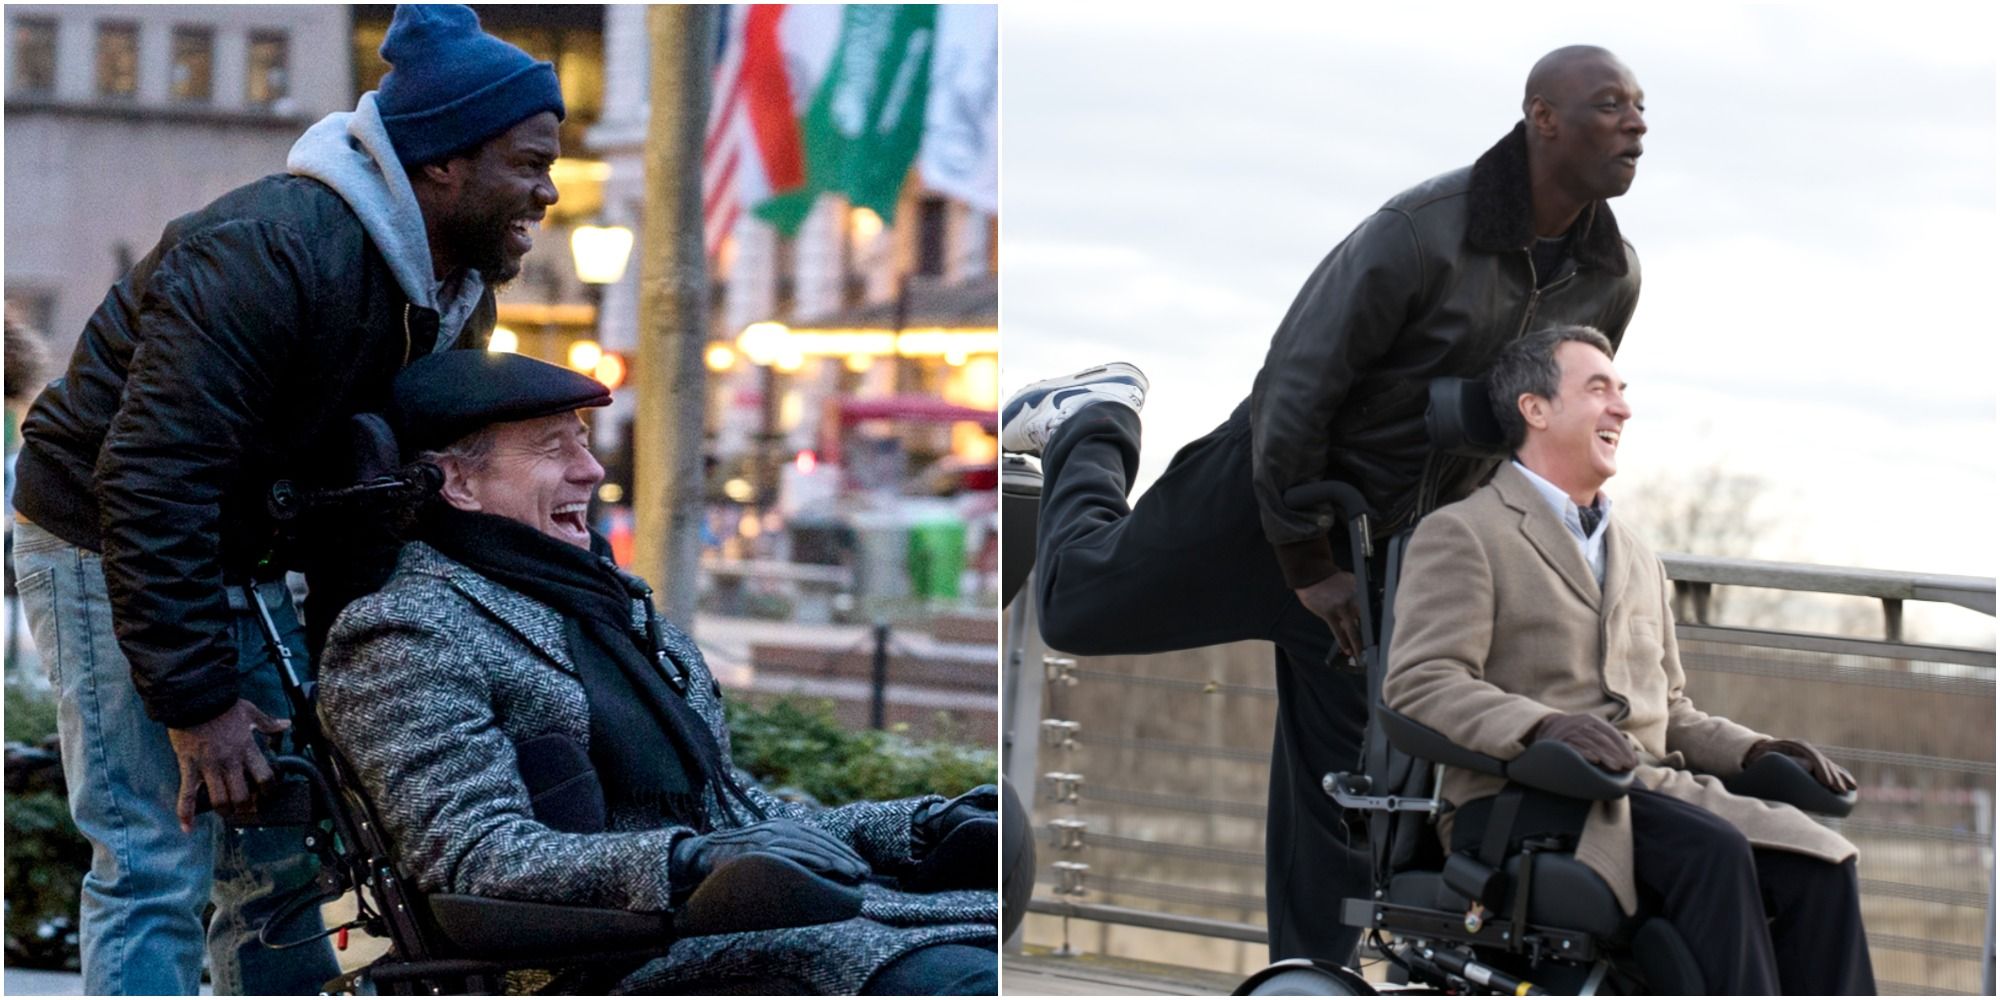 The Upside and The Intouchables